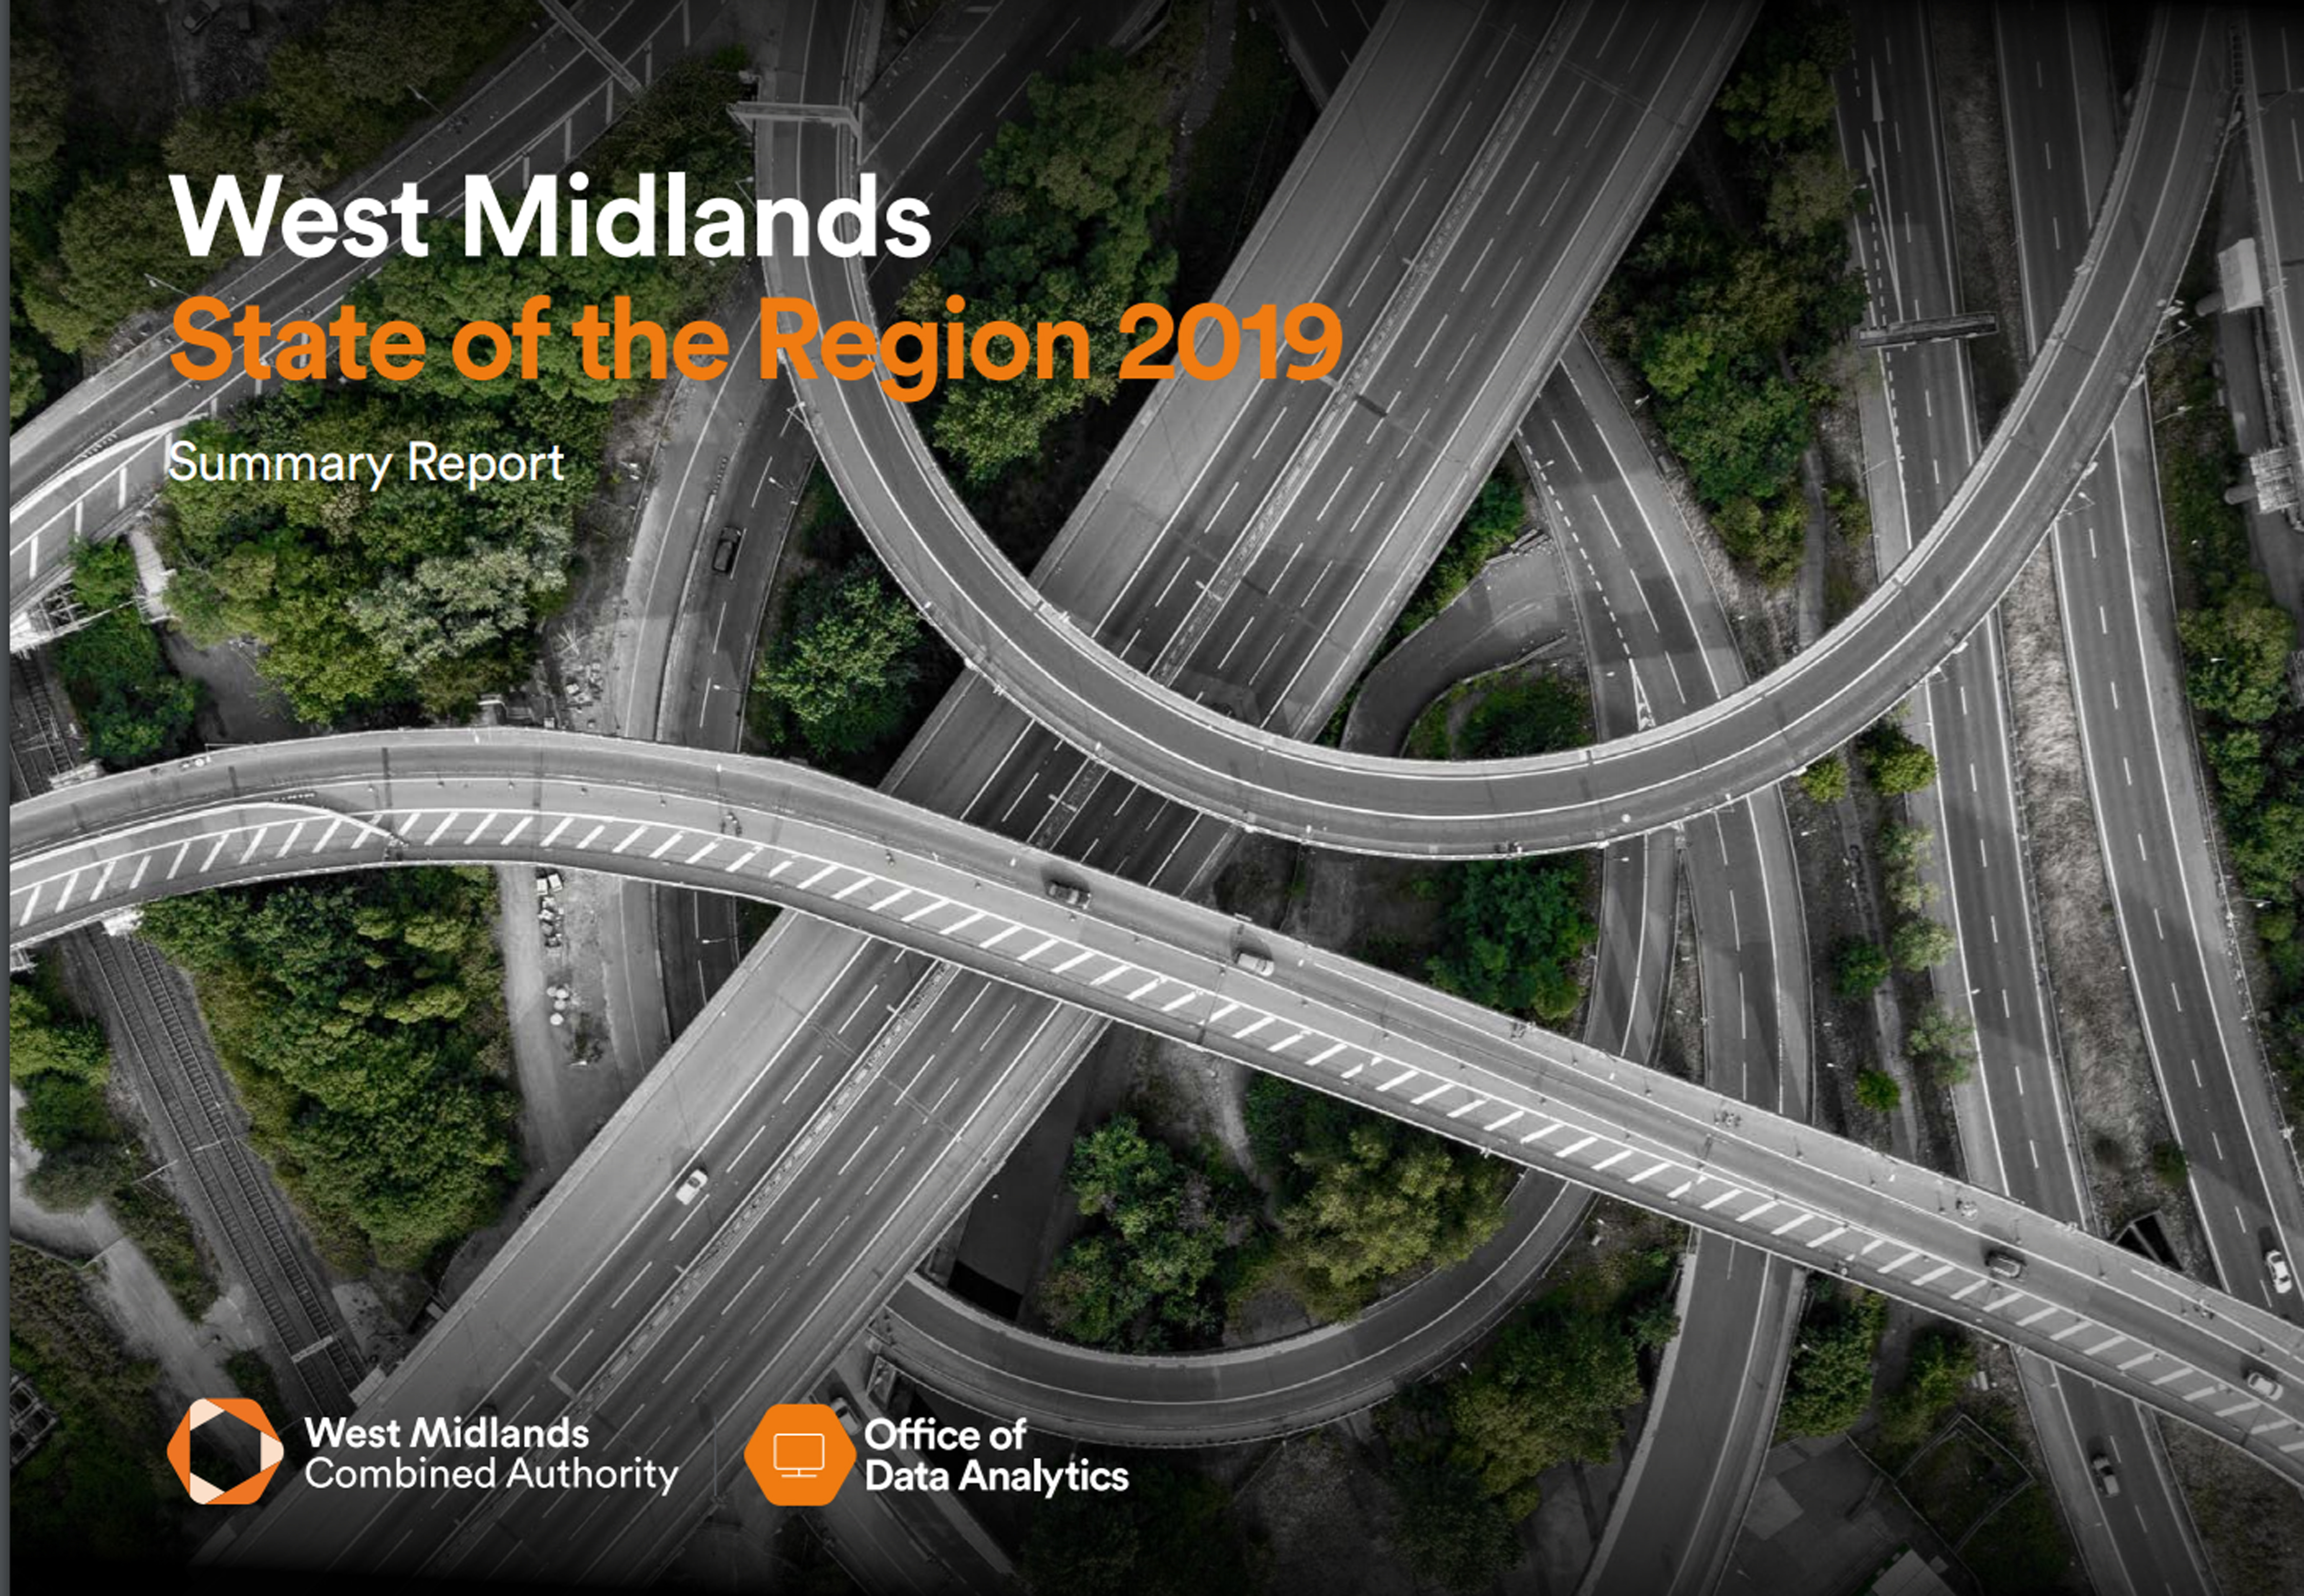 The State of the Region report 2019 shows the West Midlands is growing faster than any area outside London